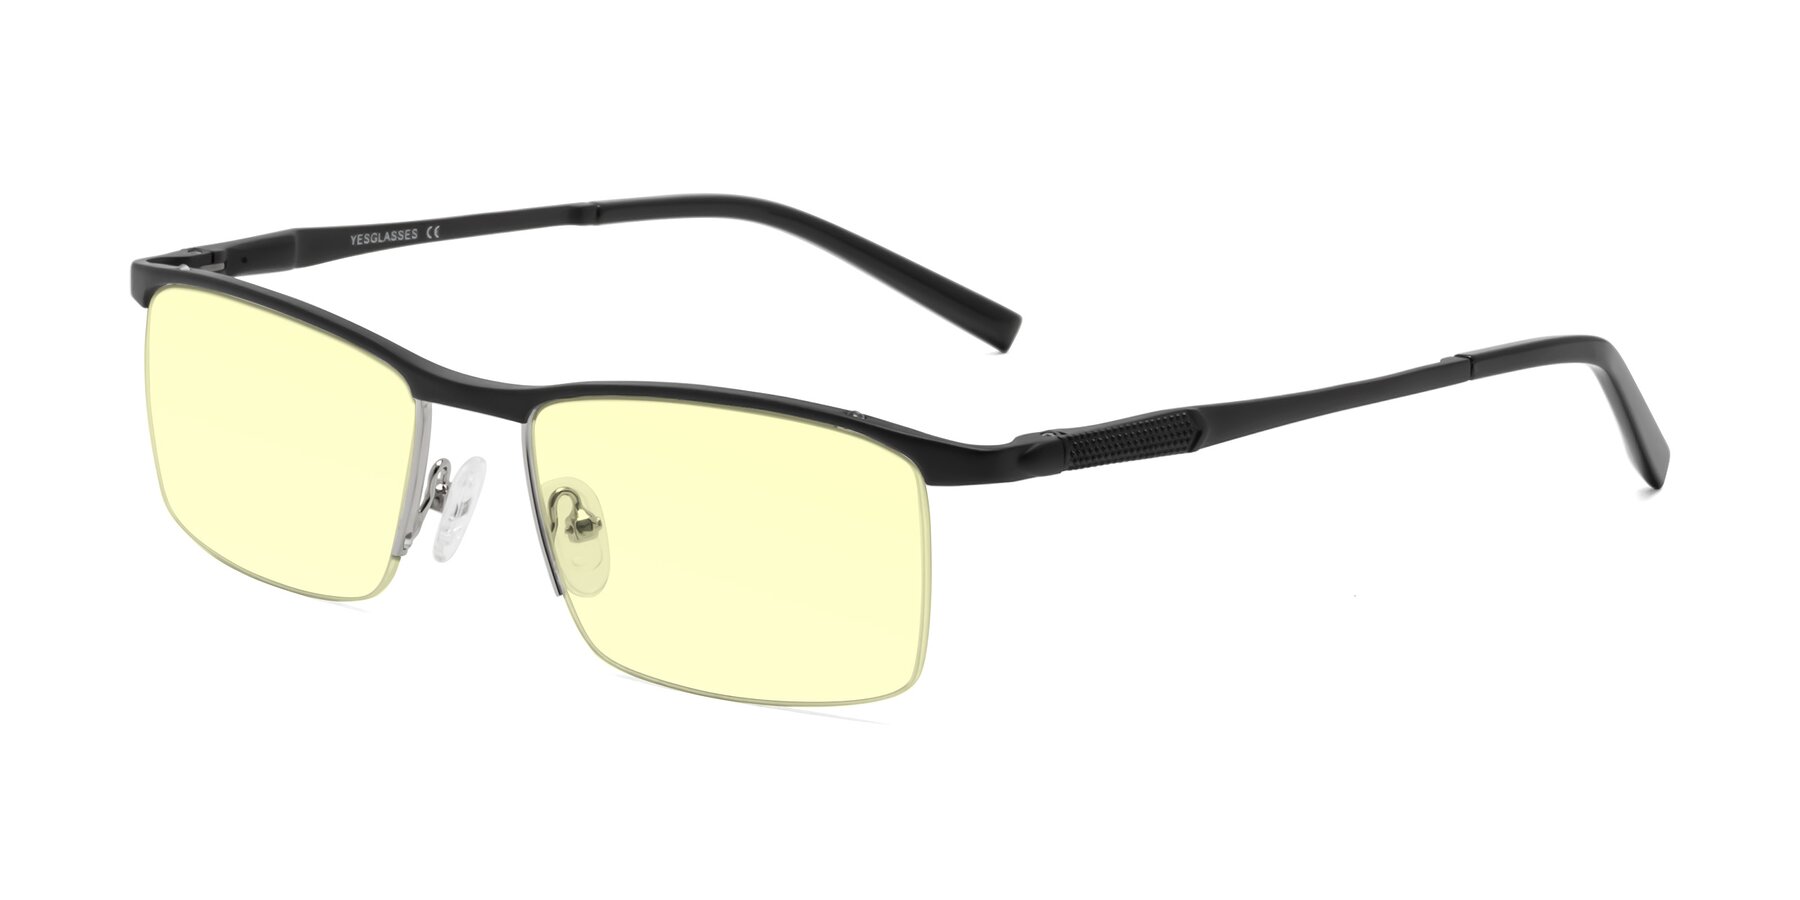 Angle of CX6303 in Black with Light Yellow Tinted Lenses